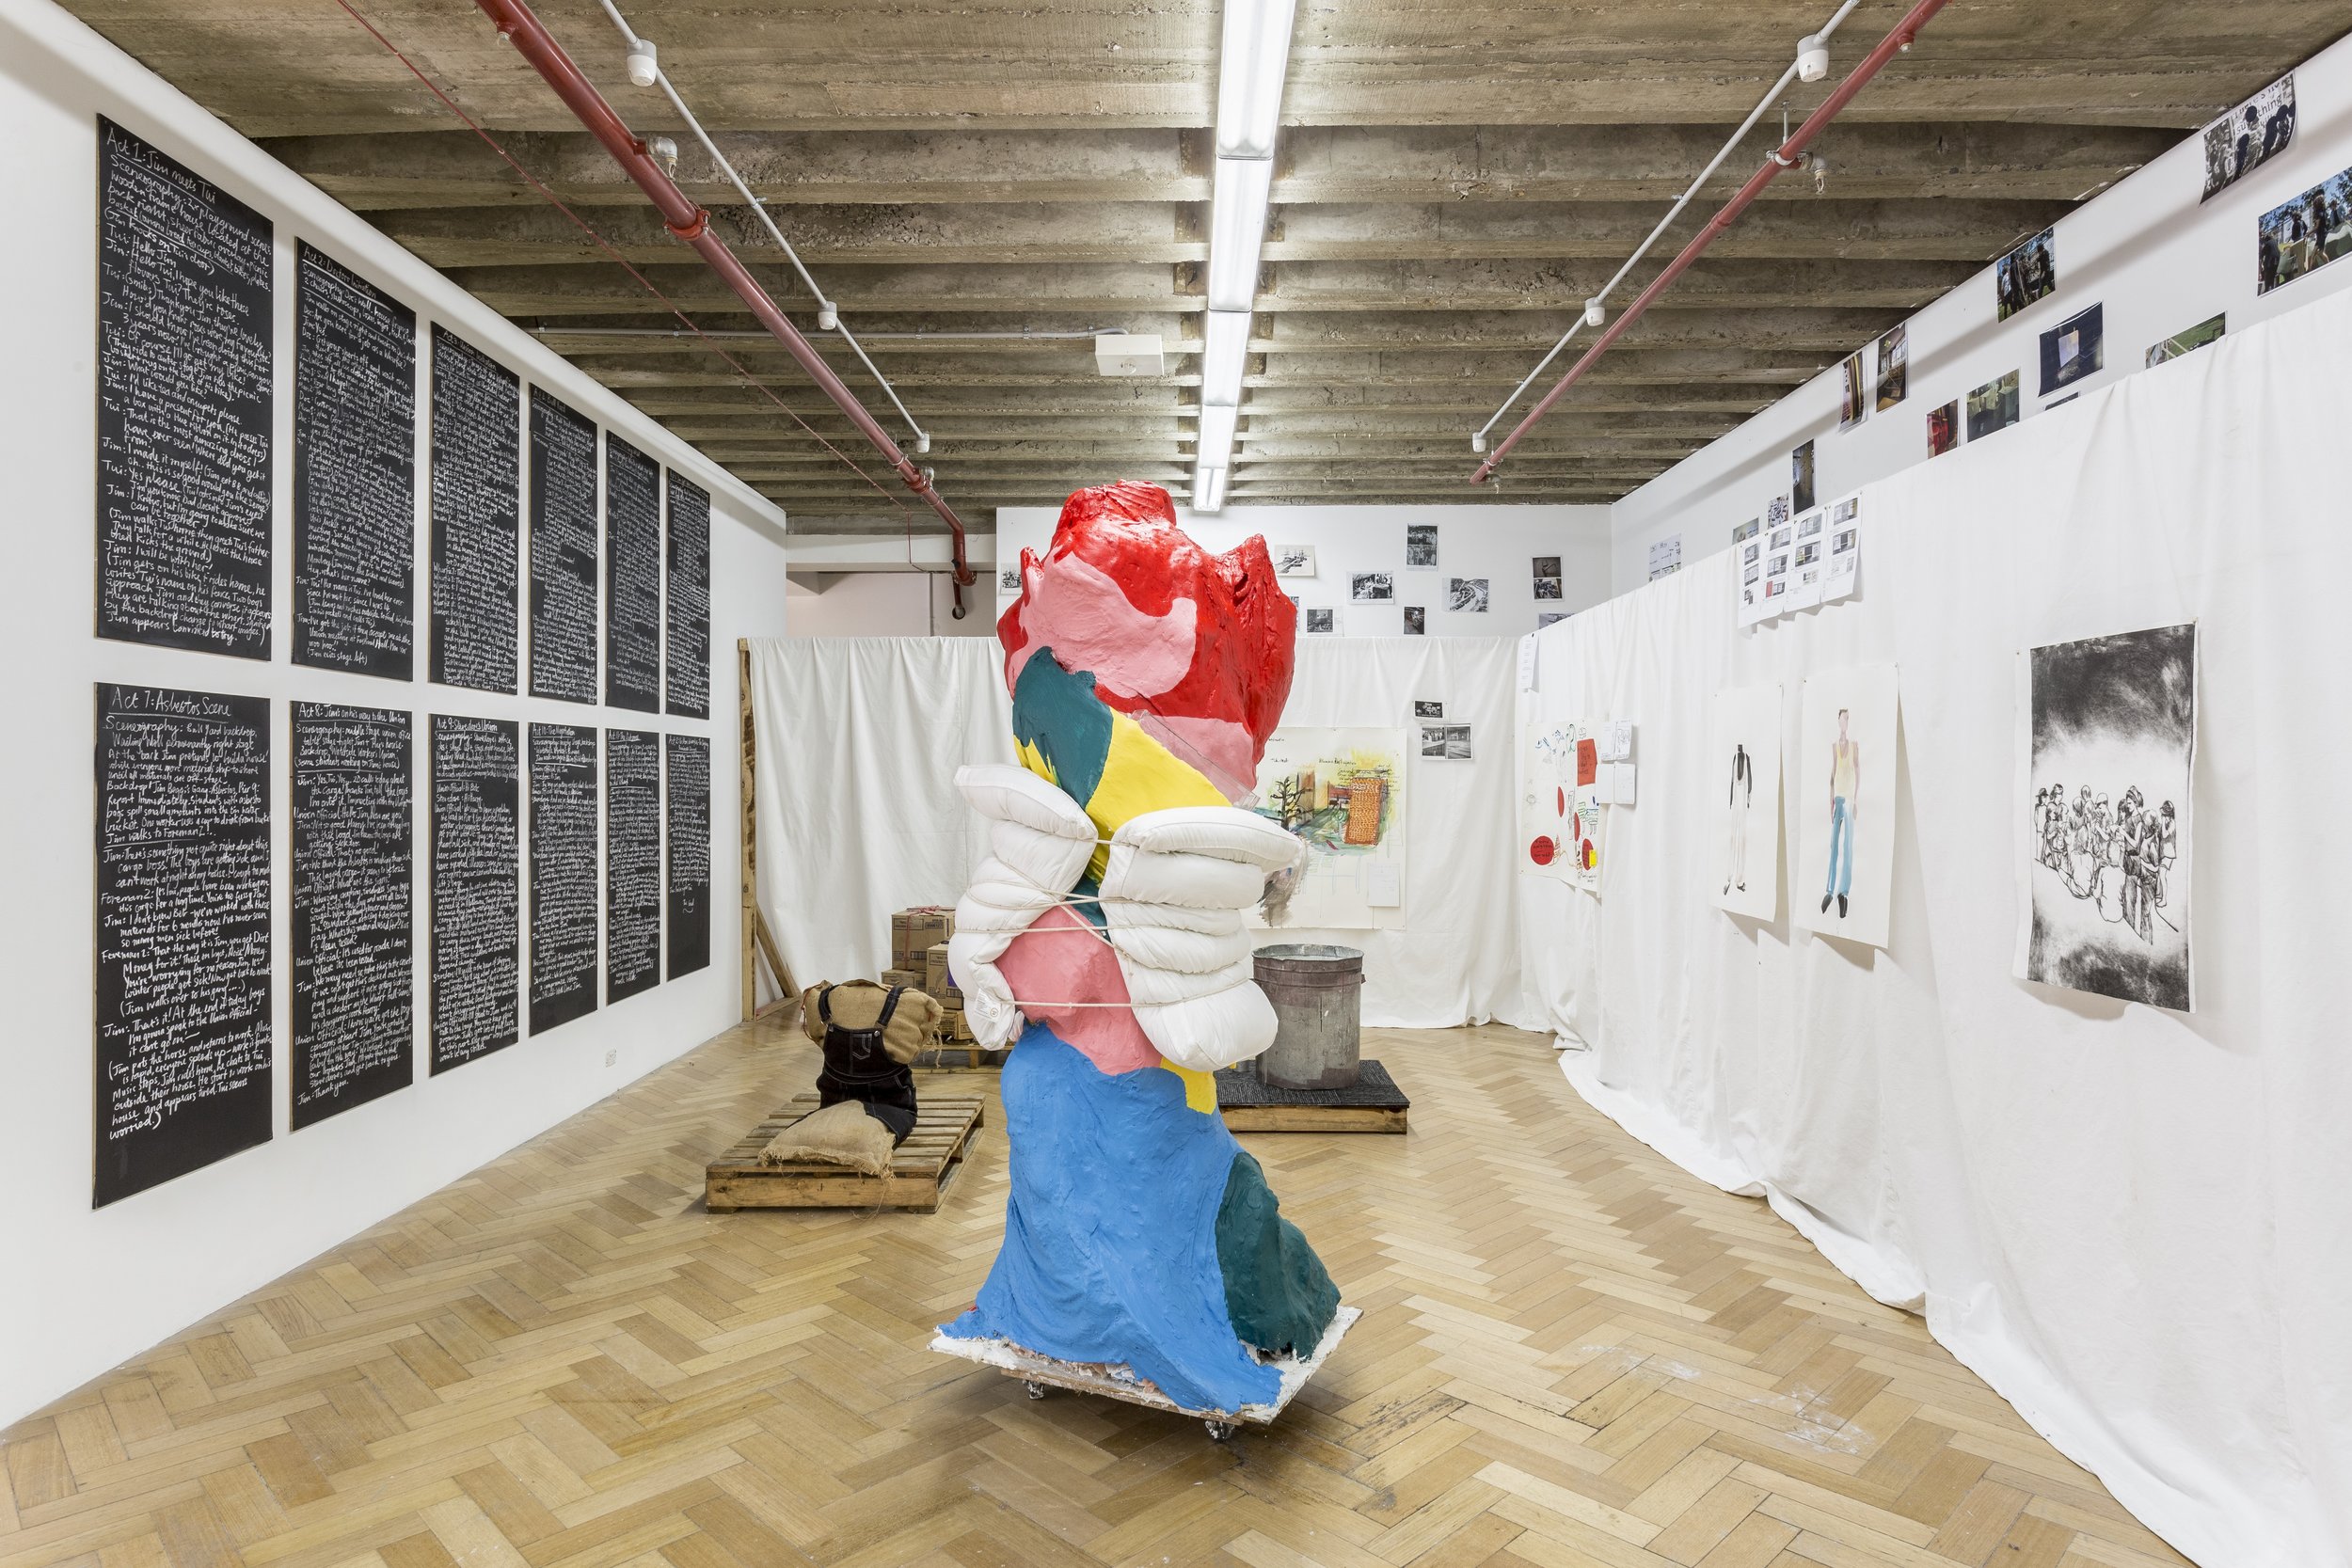   storyboard poetics and pedagogic process , 2017, installation view, mixed media, dimensions variable. Westspace Gallery. Image: Christo Crocker 